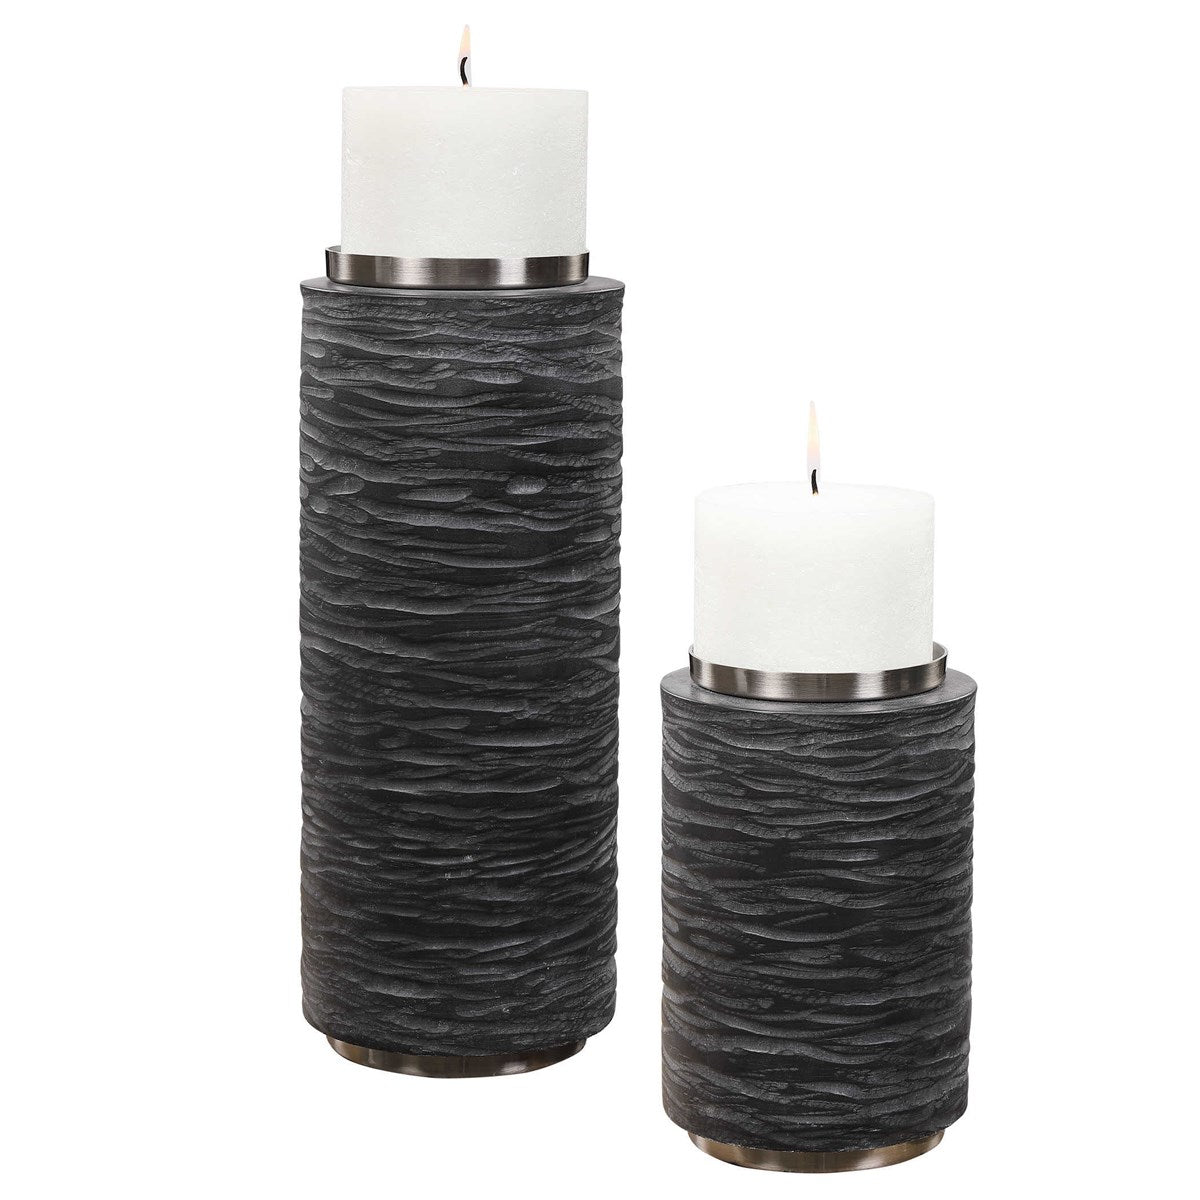 Strathmore Candle Holders- Set of 2